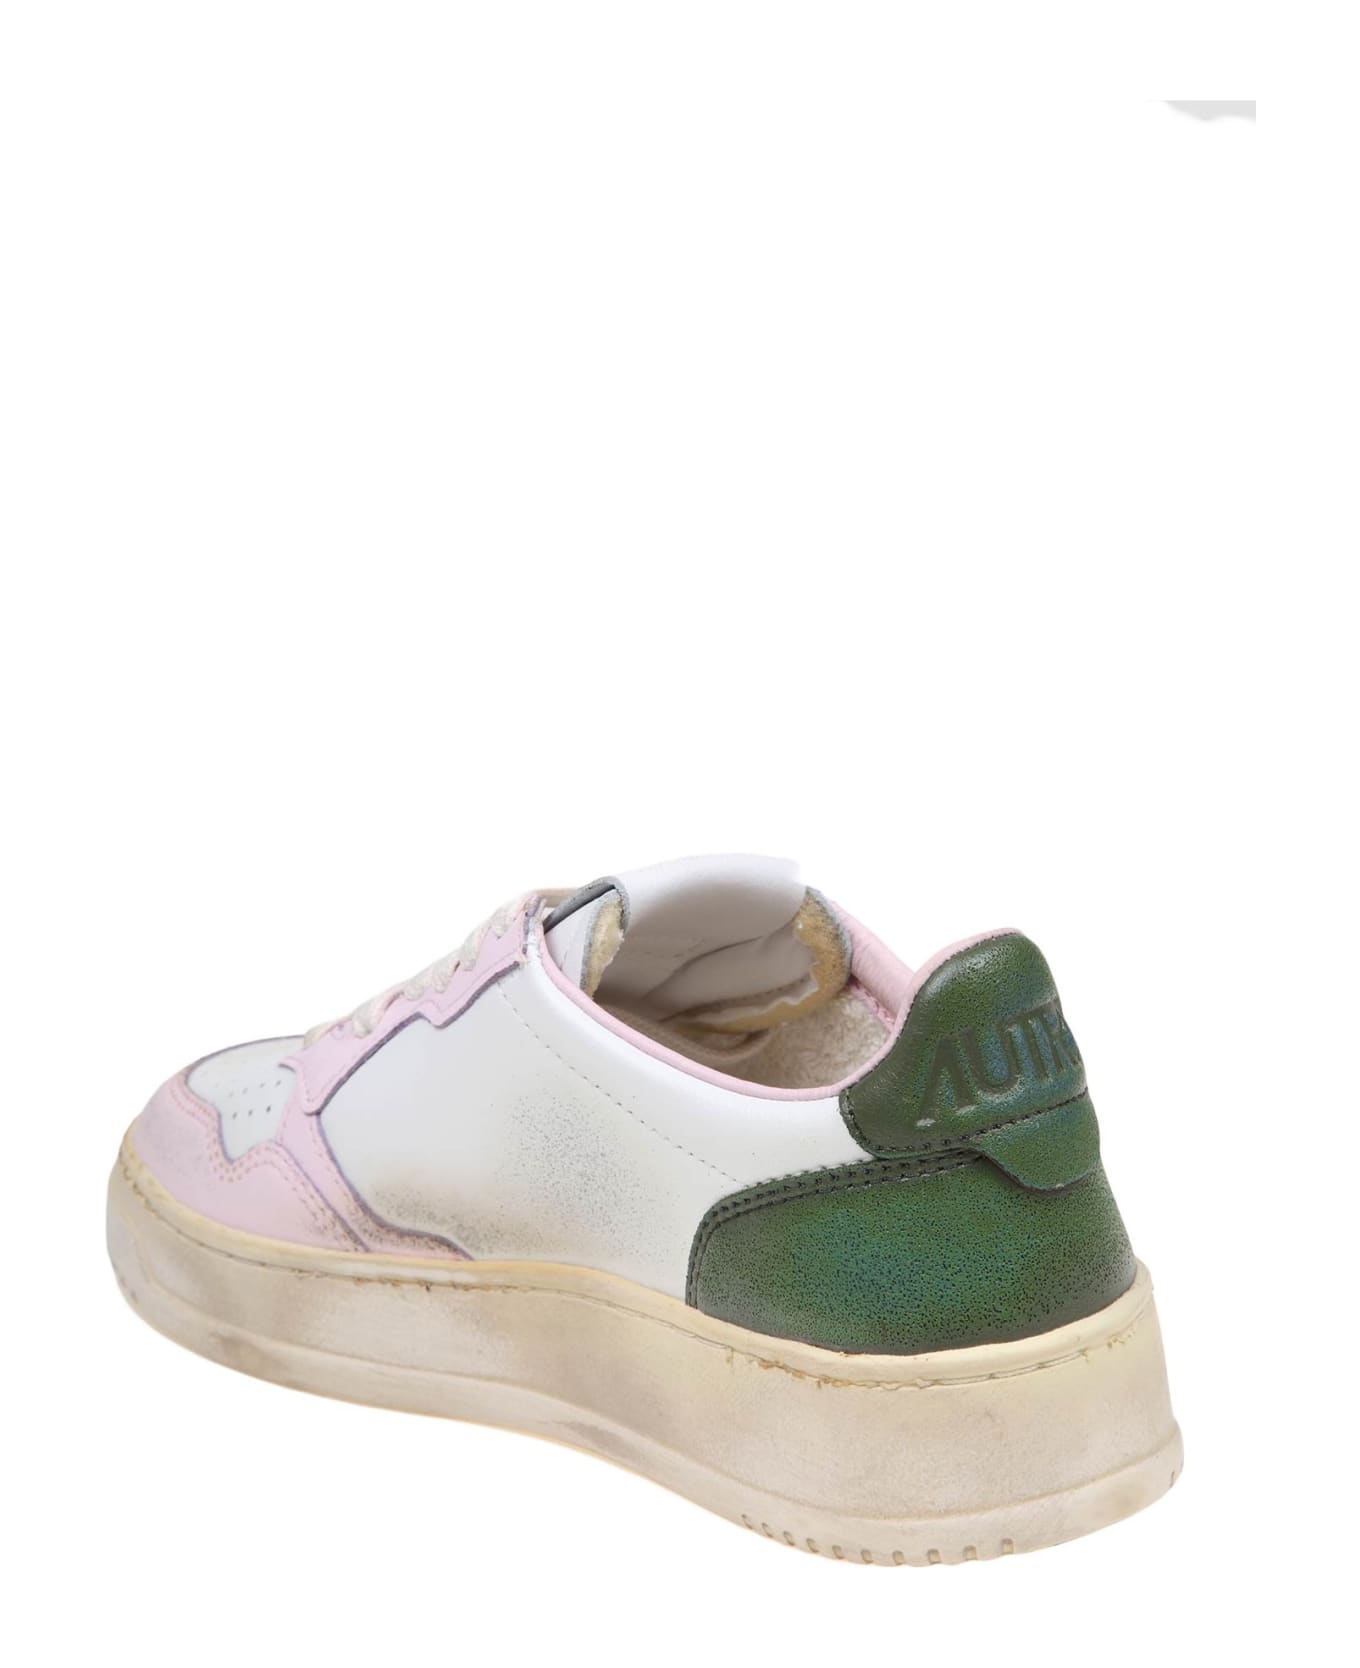 Autry Vintage Leather Sneakers - White/Lilac